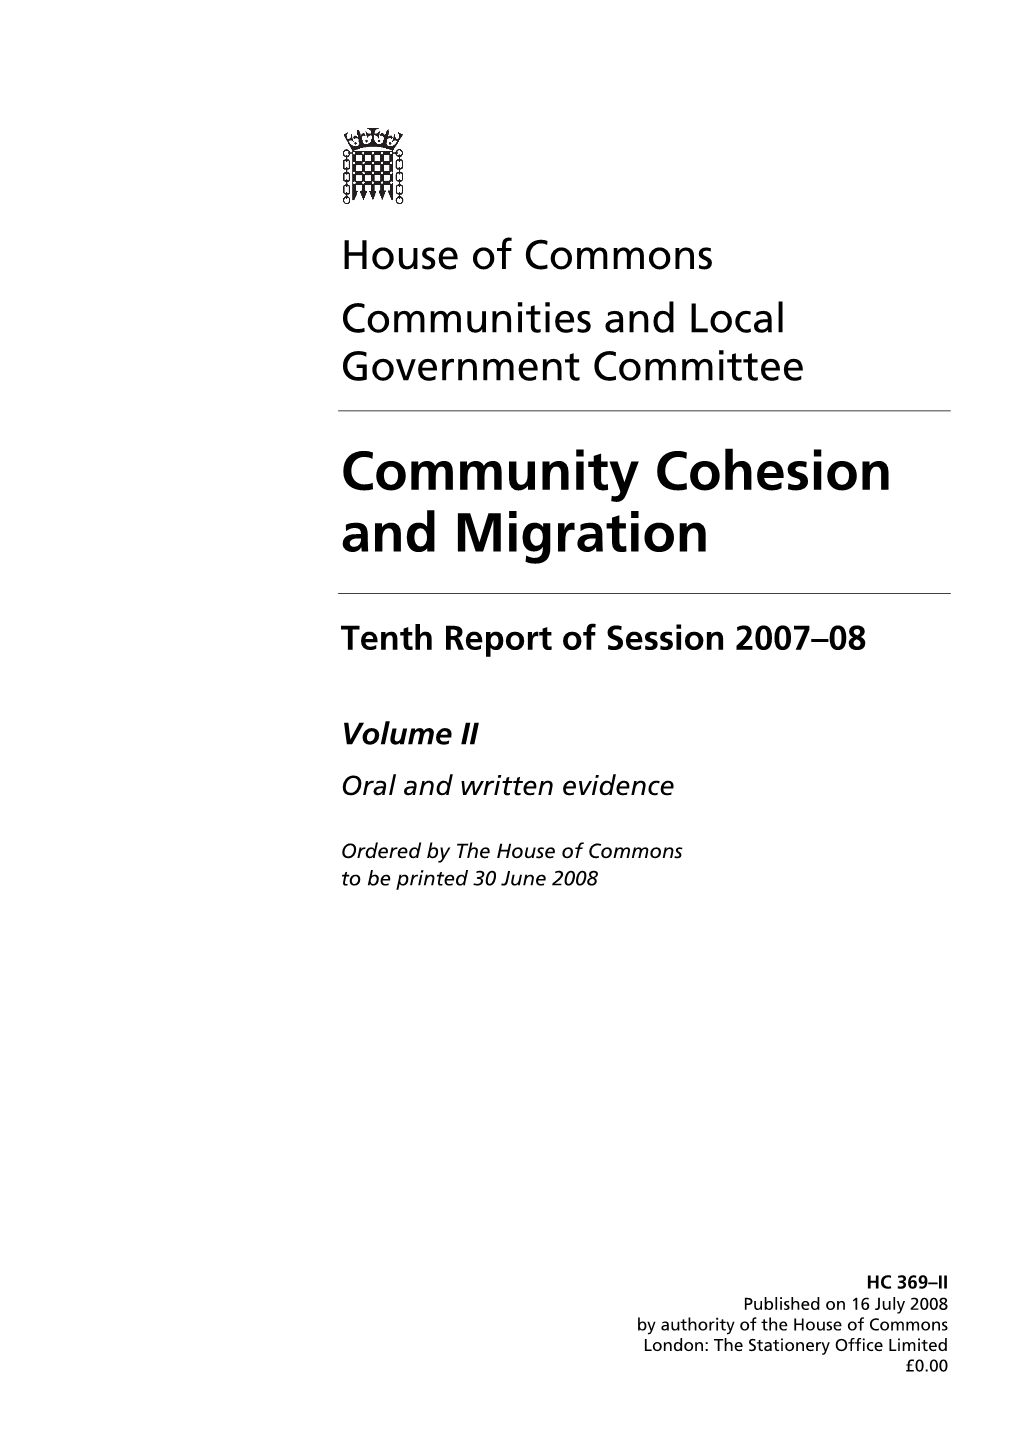 Community Cohesion and Migration